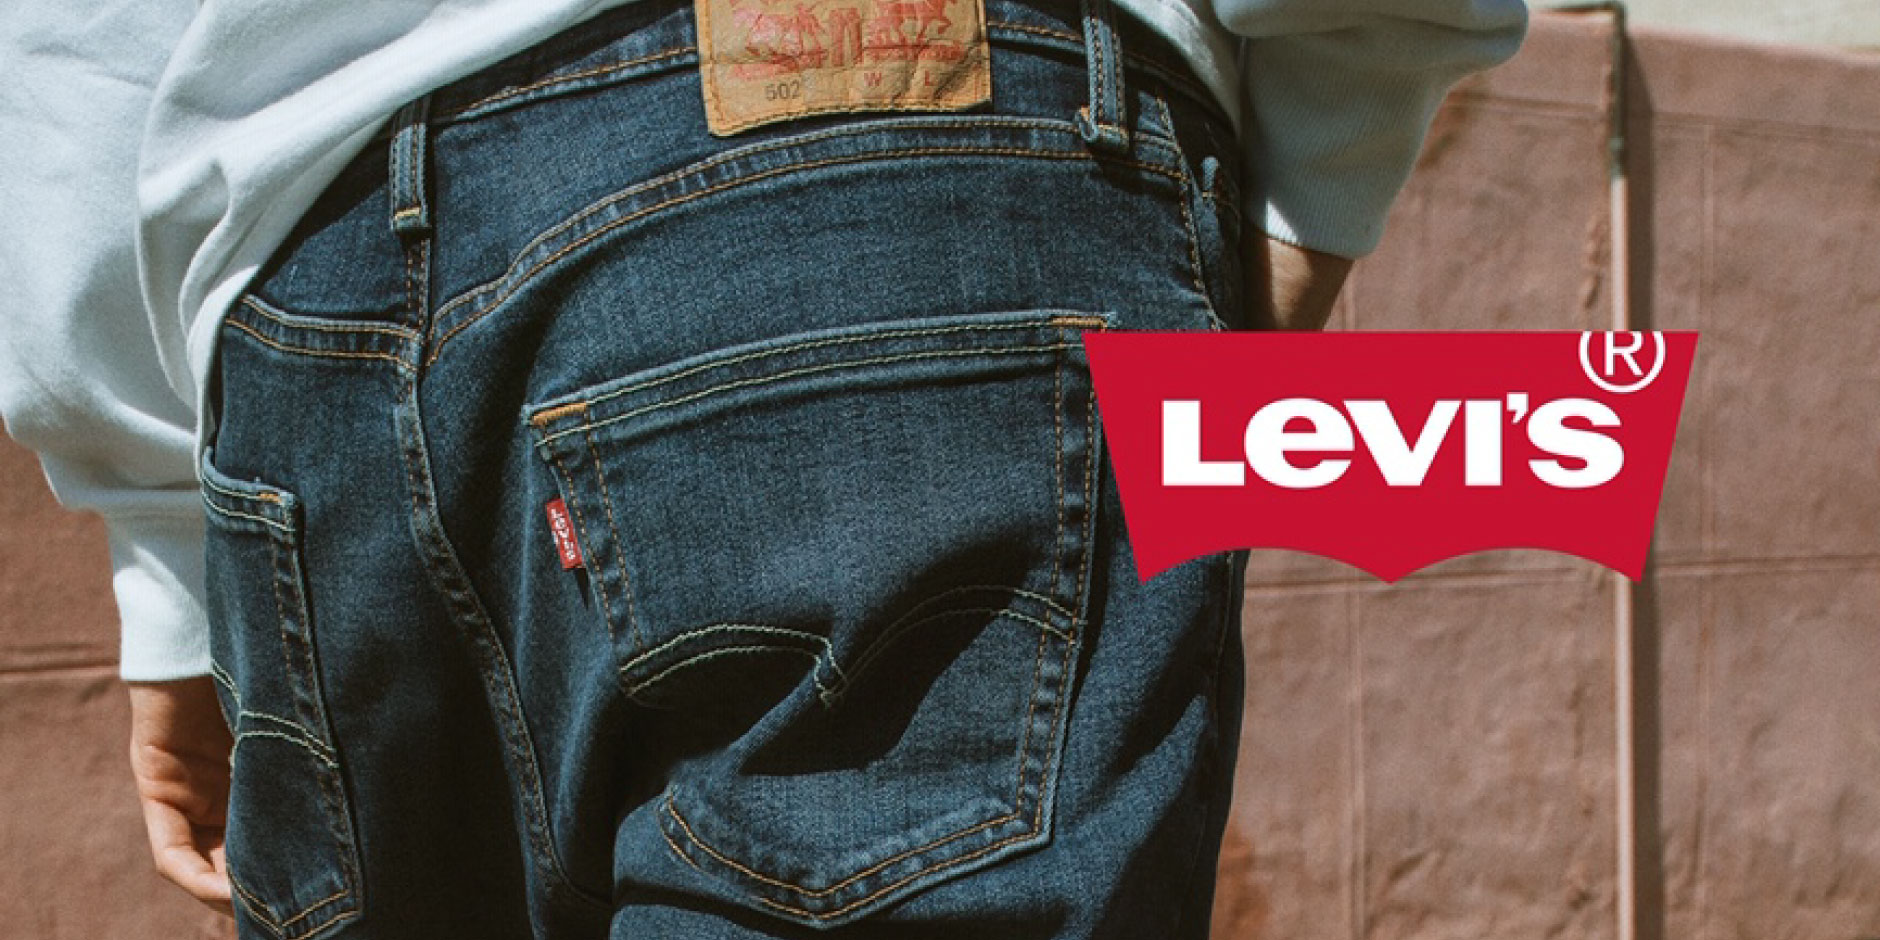 Target's Partnership with Levi Strauss & Co. is Expanding with Red